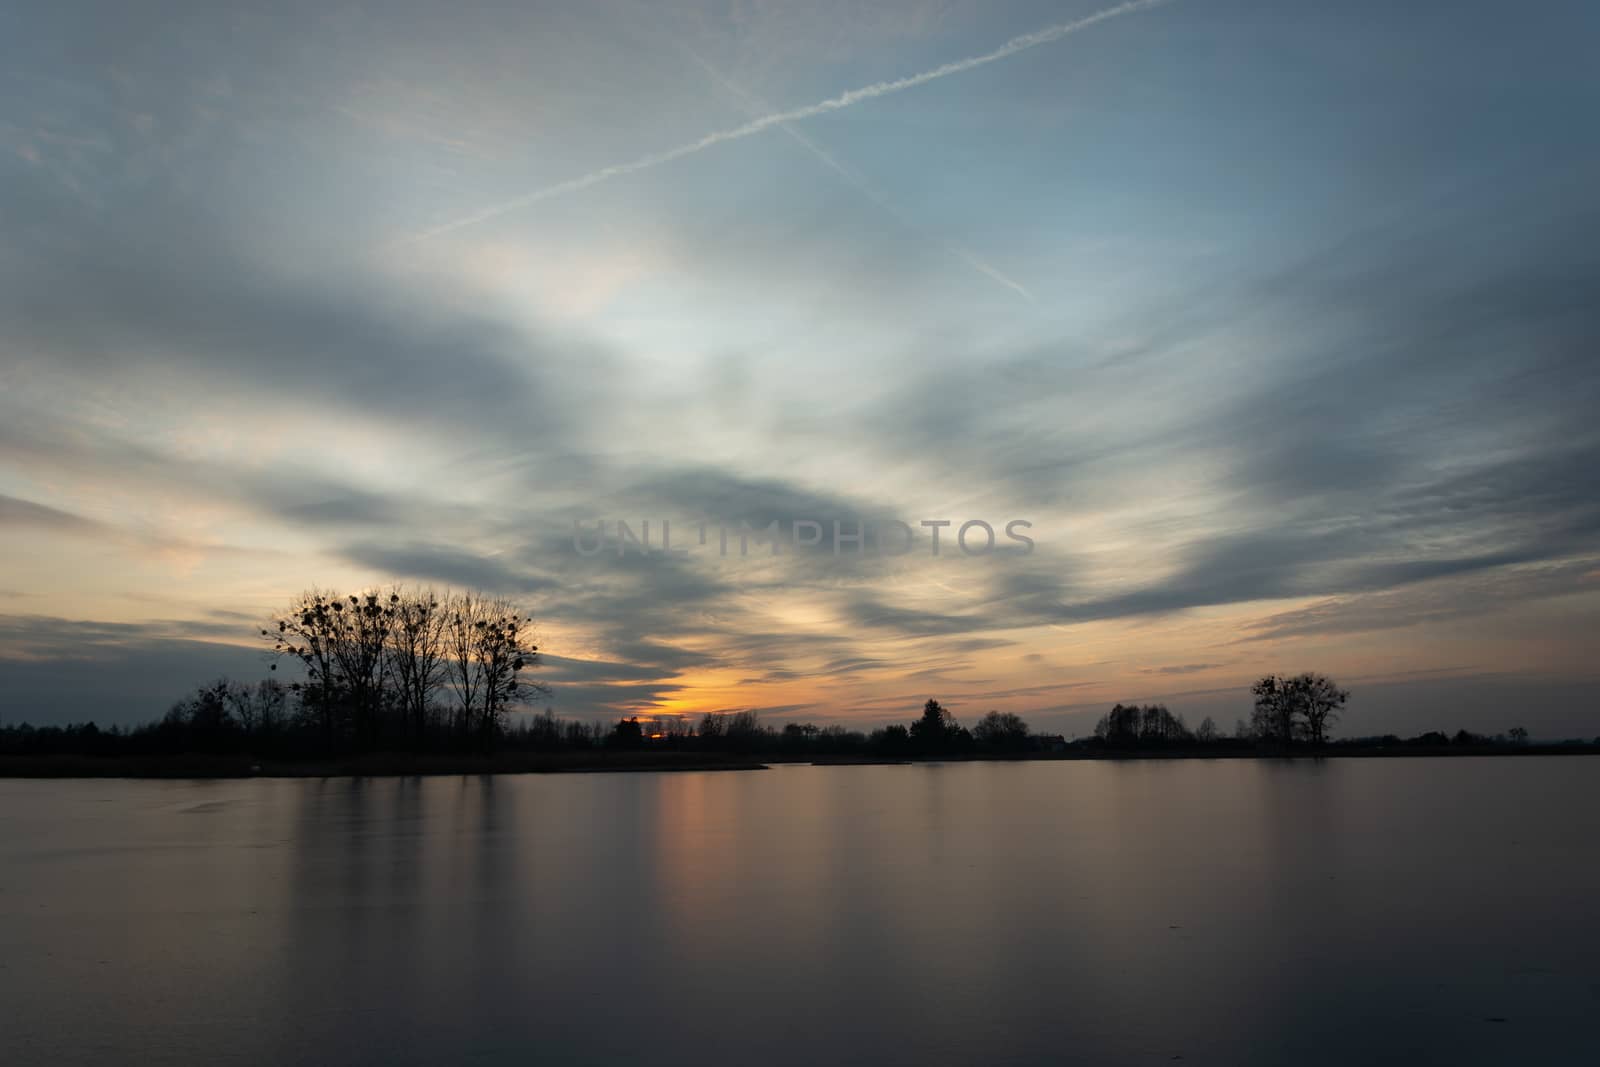 Clouds after sunset over a frozen lake by darekb22